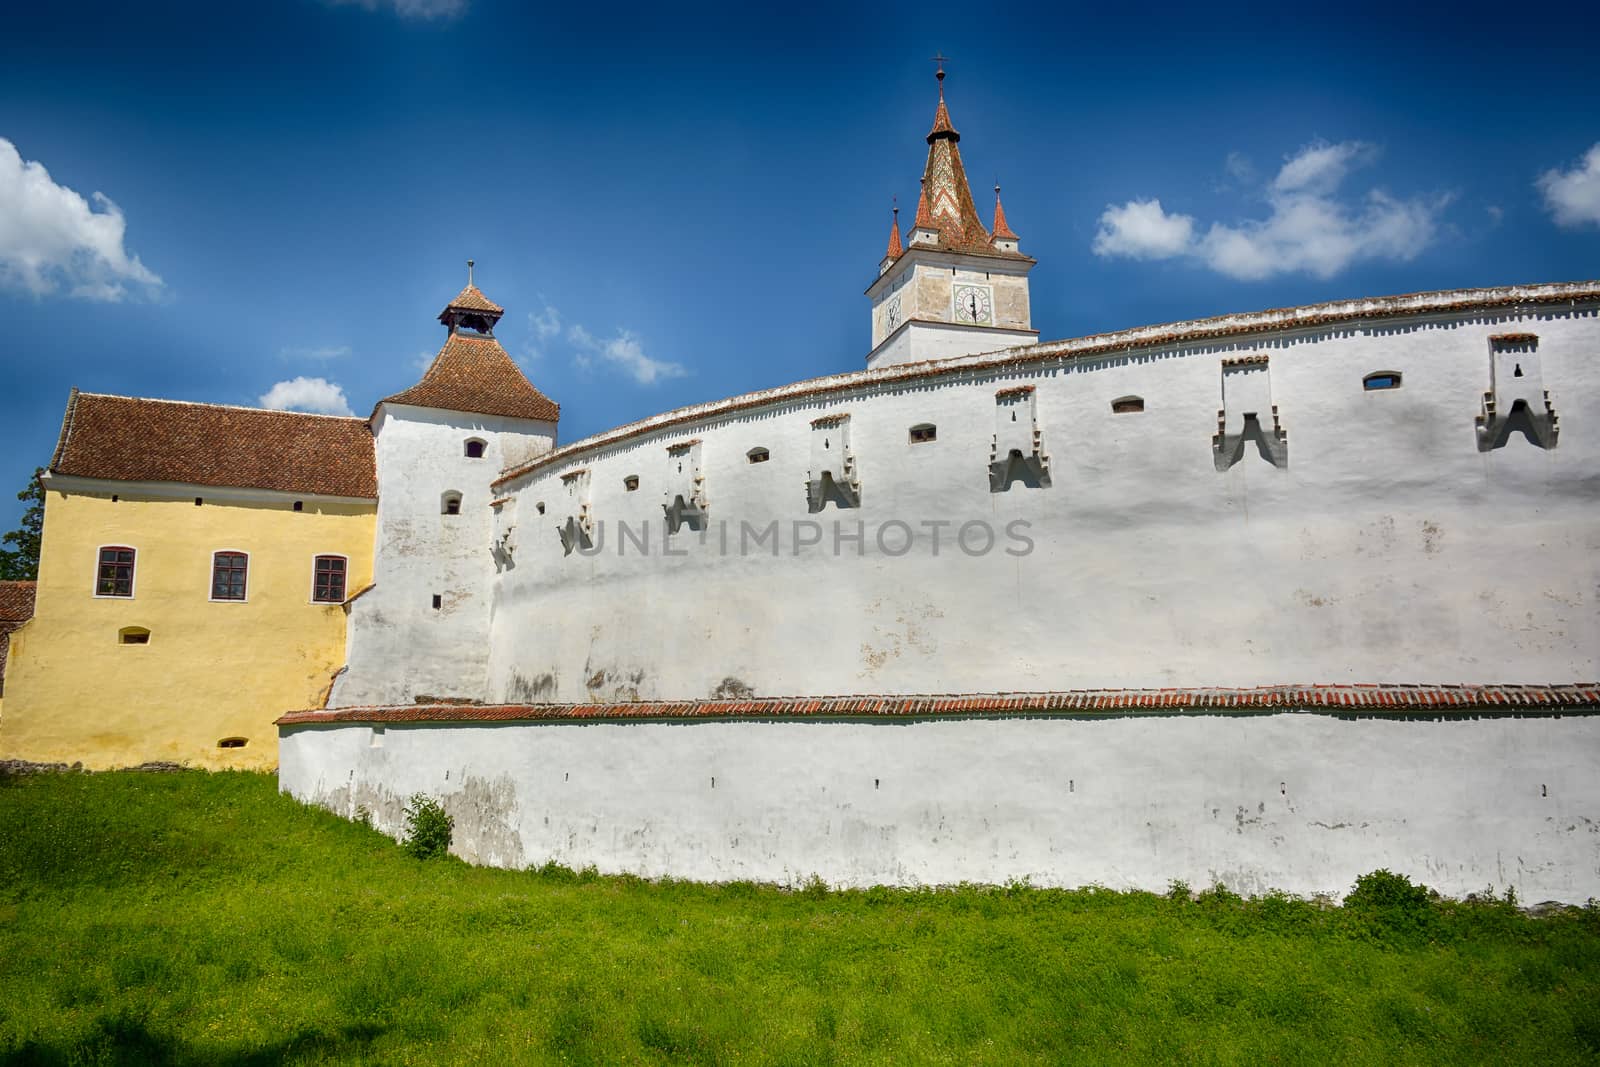 Harman, the Fortified Church, (in Brasov County), which was built in the first half of the 12th century, following the great Mongolian invasion in 1241. by constantinhurghea